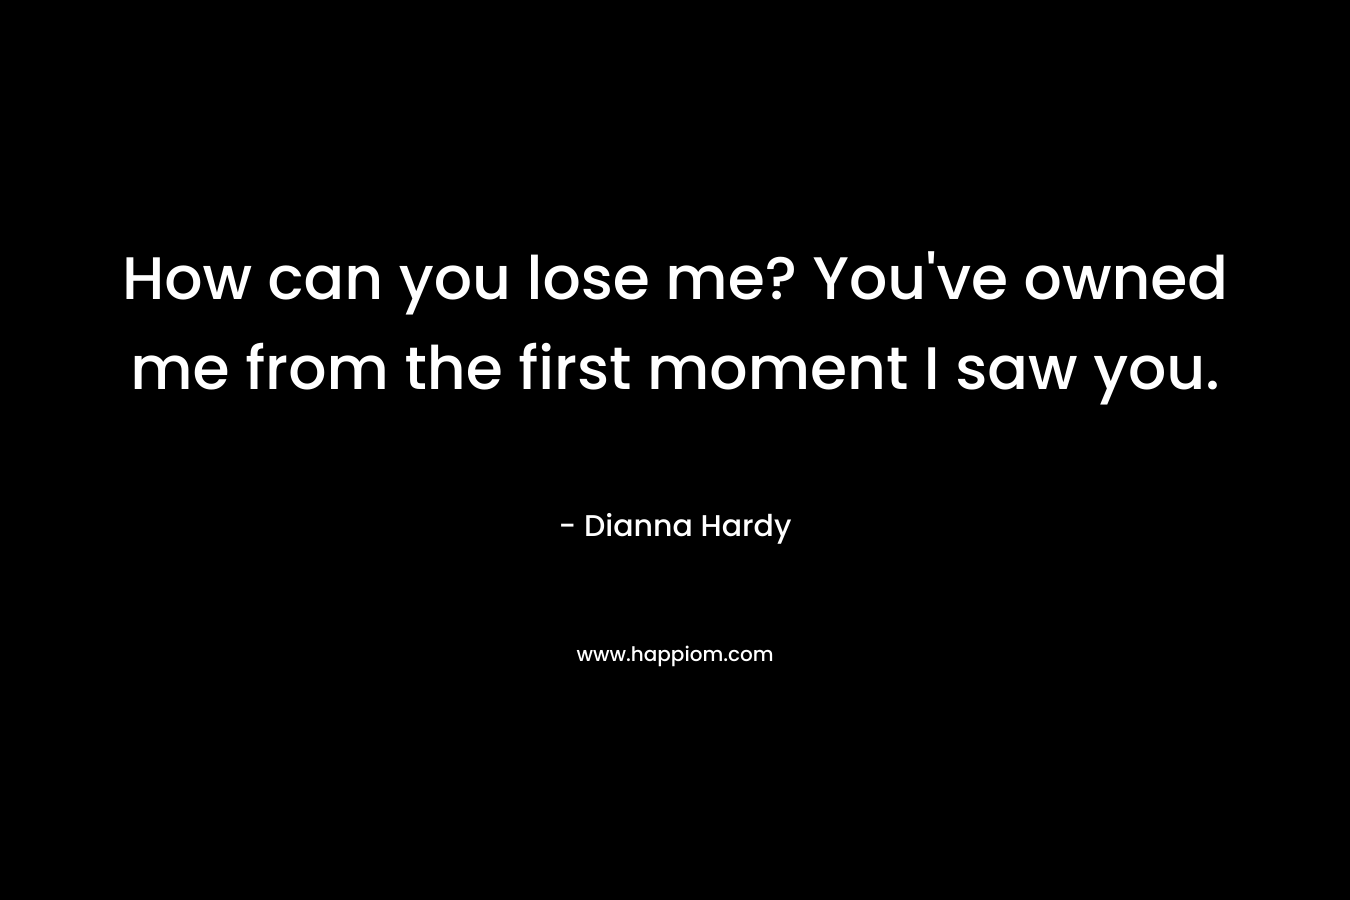 How can you lose me? You’ve owned me from the first moment I saw you. – Dianna Hardy